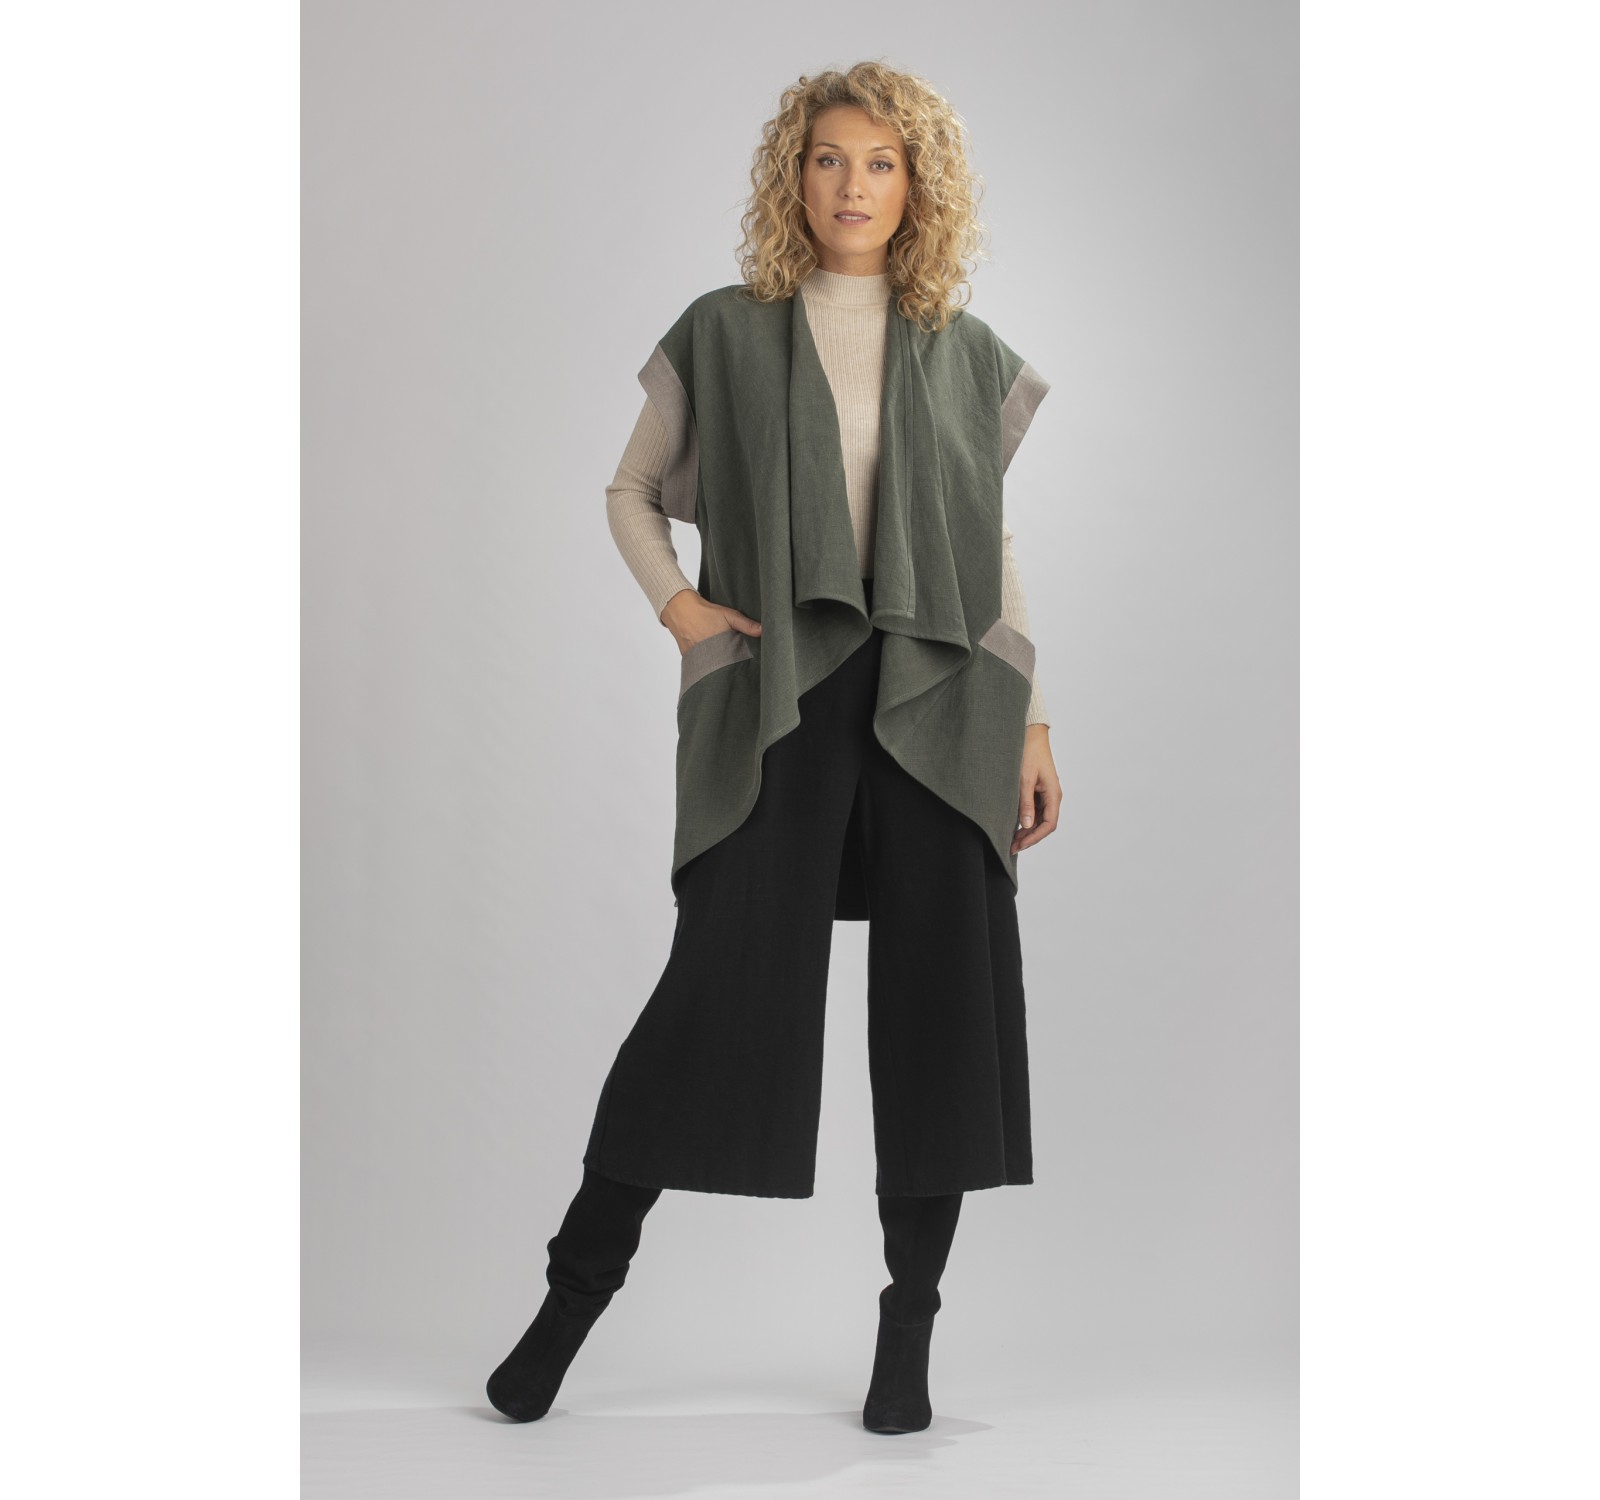 ALICE SLEEVELESS JACKET ALMOND GREEN TWO-TONE WOOL LINEN  WITH CULOTTES SKIRT PANTS